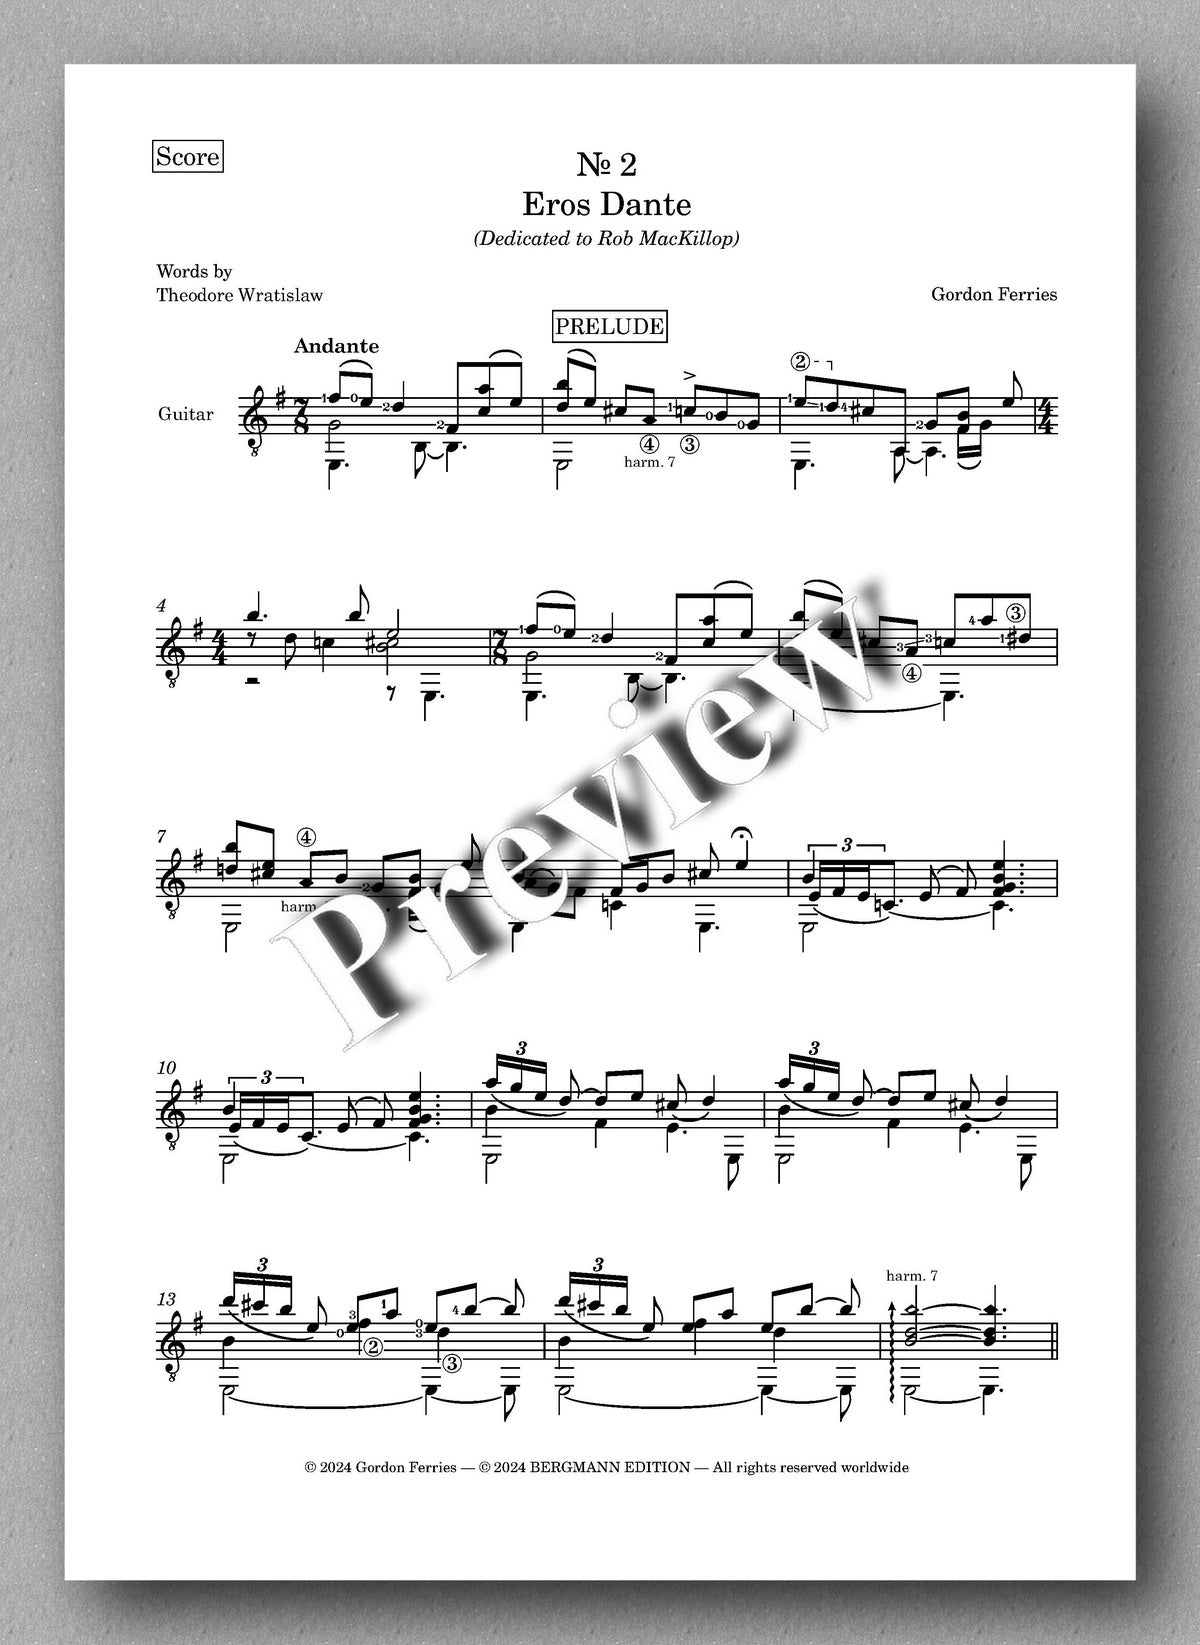 Gordon Ferries, Meditations - preview of the  music score 2